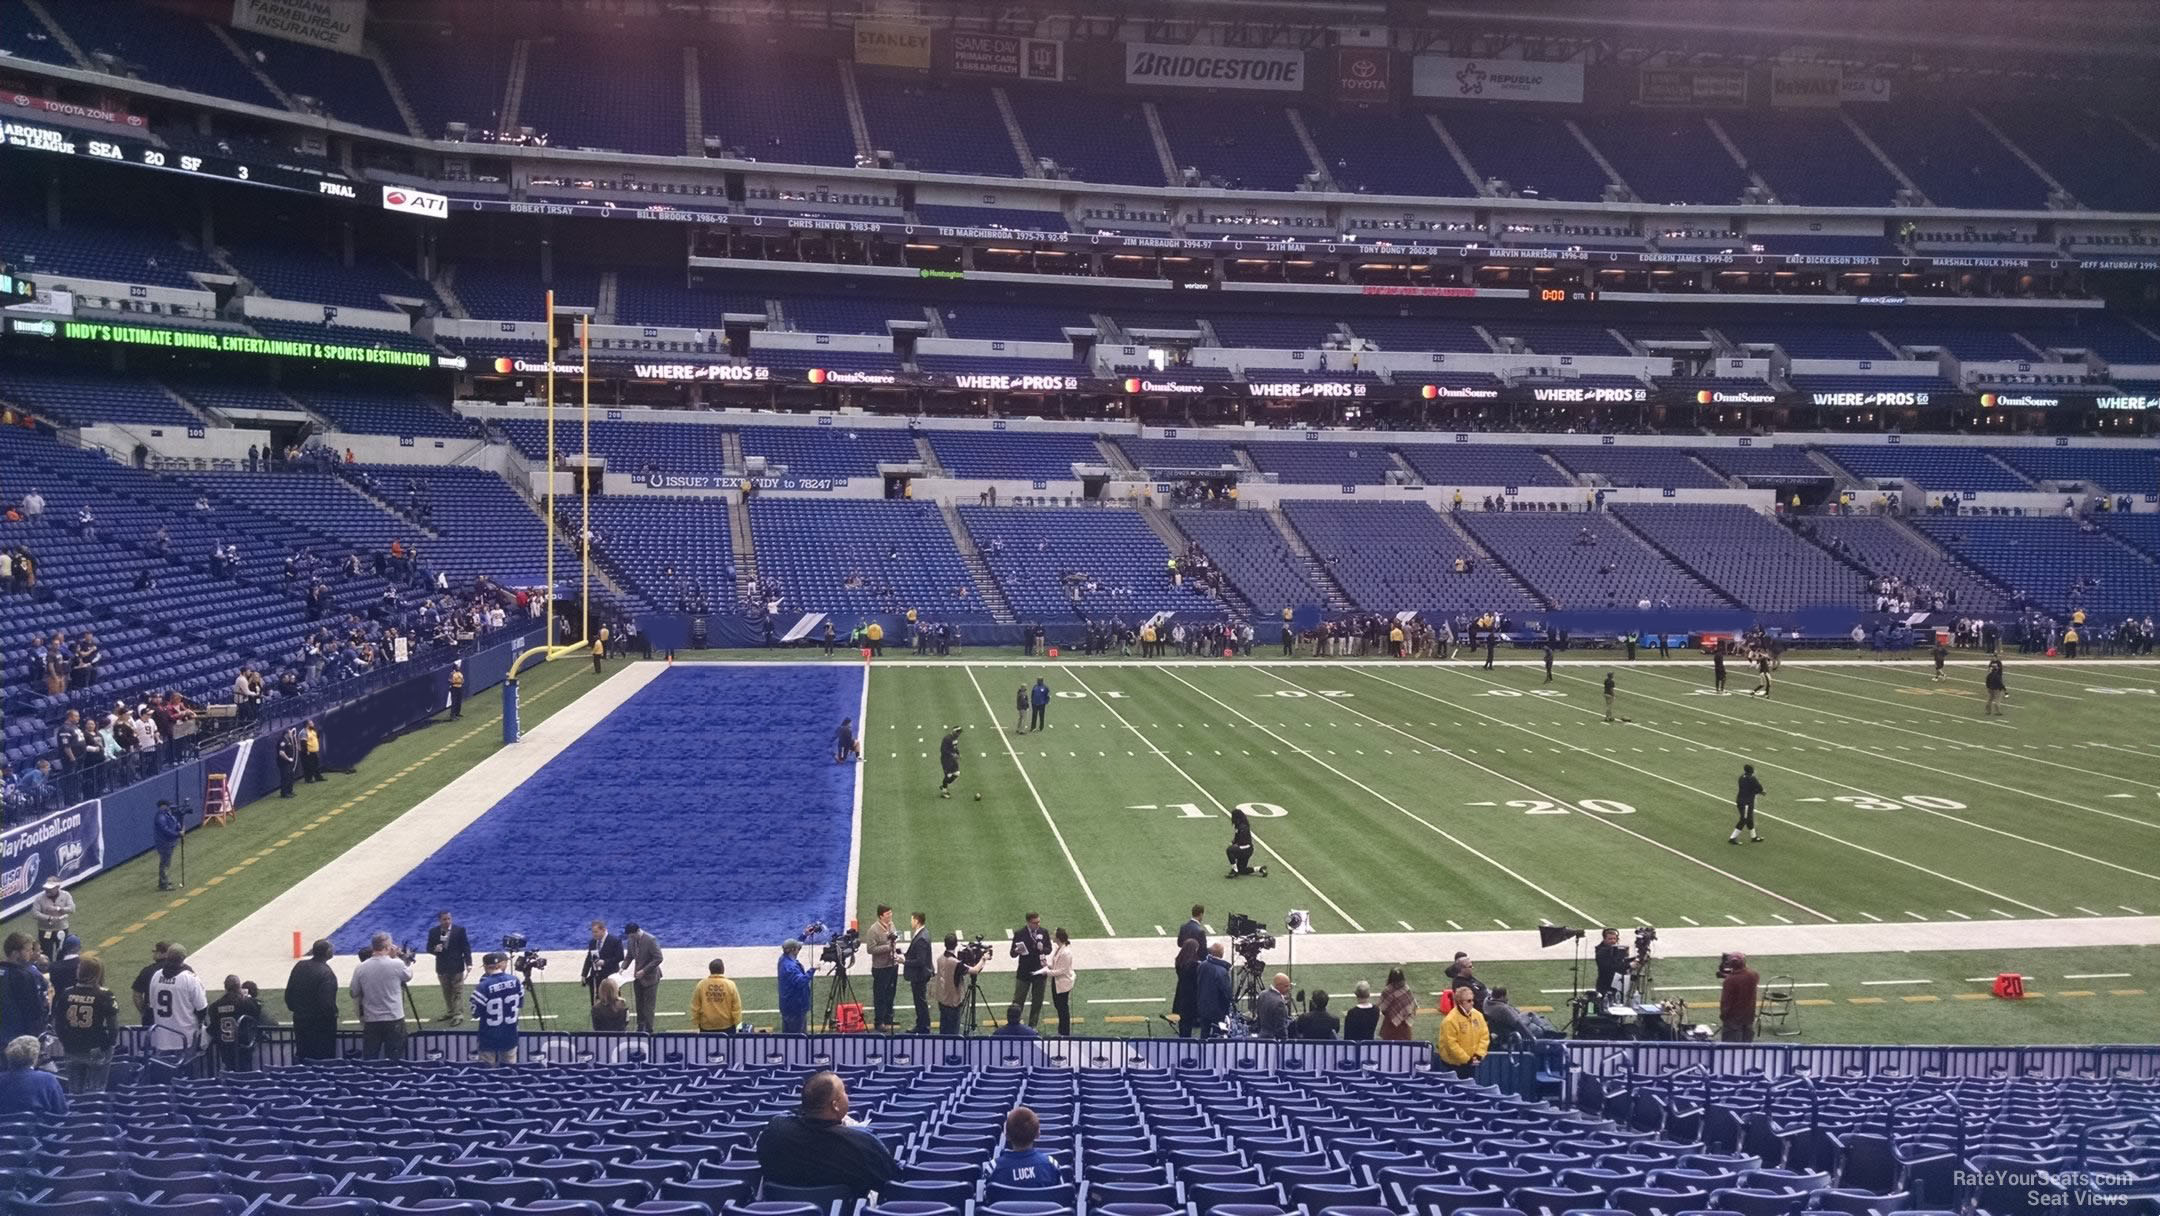 section 144, row 22 seat view  for football - lucas oil stadium